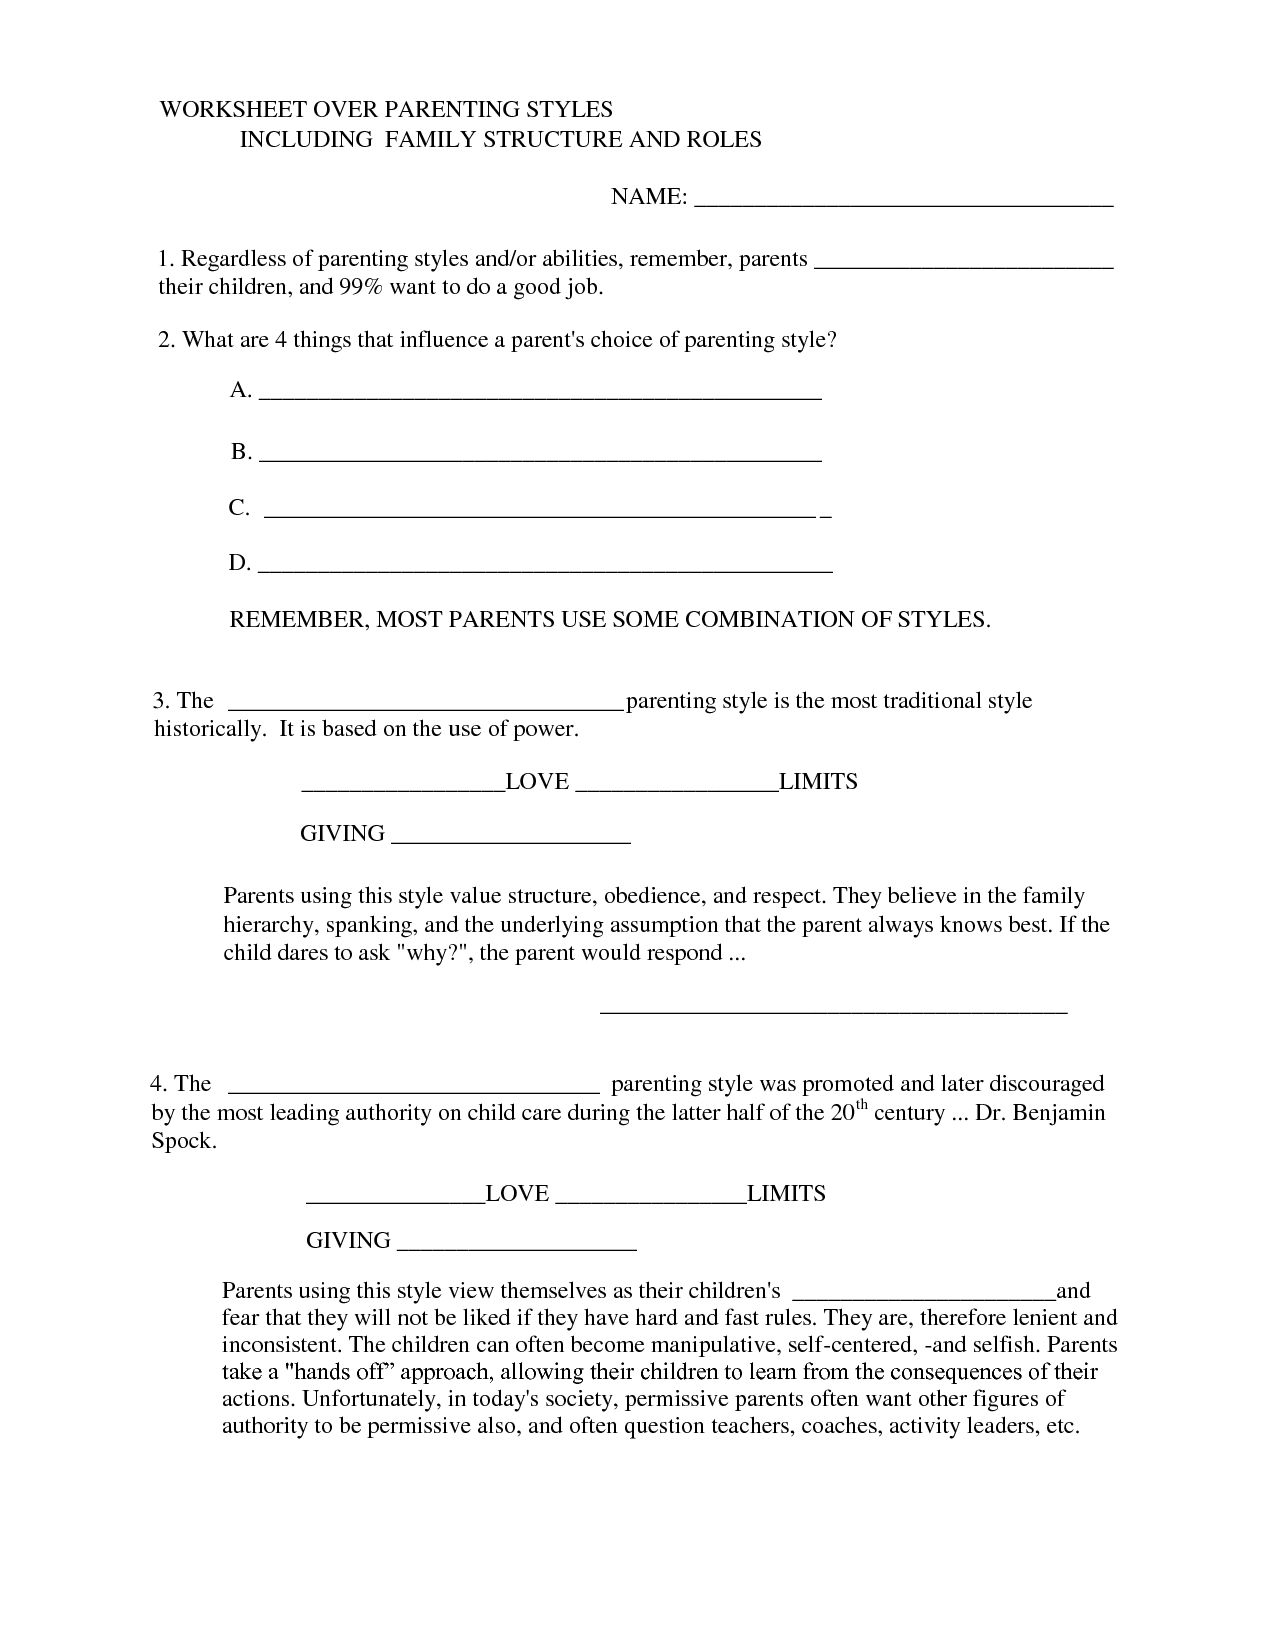 12 Best Images of Family Communication Worksheets  ParentChild Communication Worksheets 